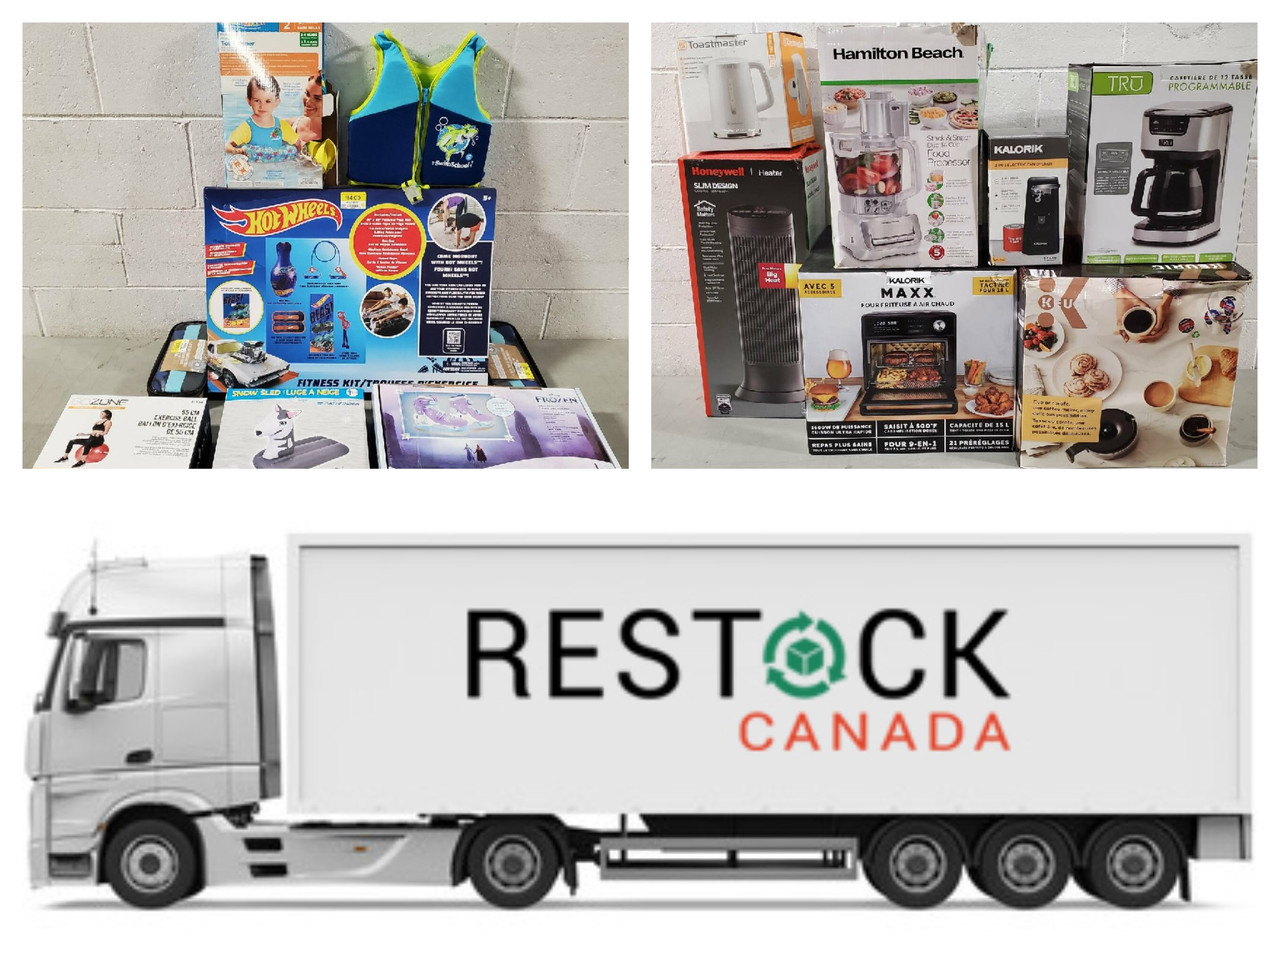 3806 Units of Home, Fashion & More - MSRP $76,895 - Returns (Lot #  TK627301) - Restock Canada